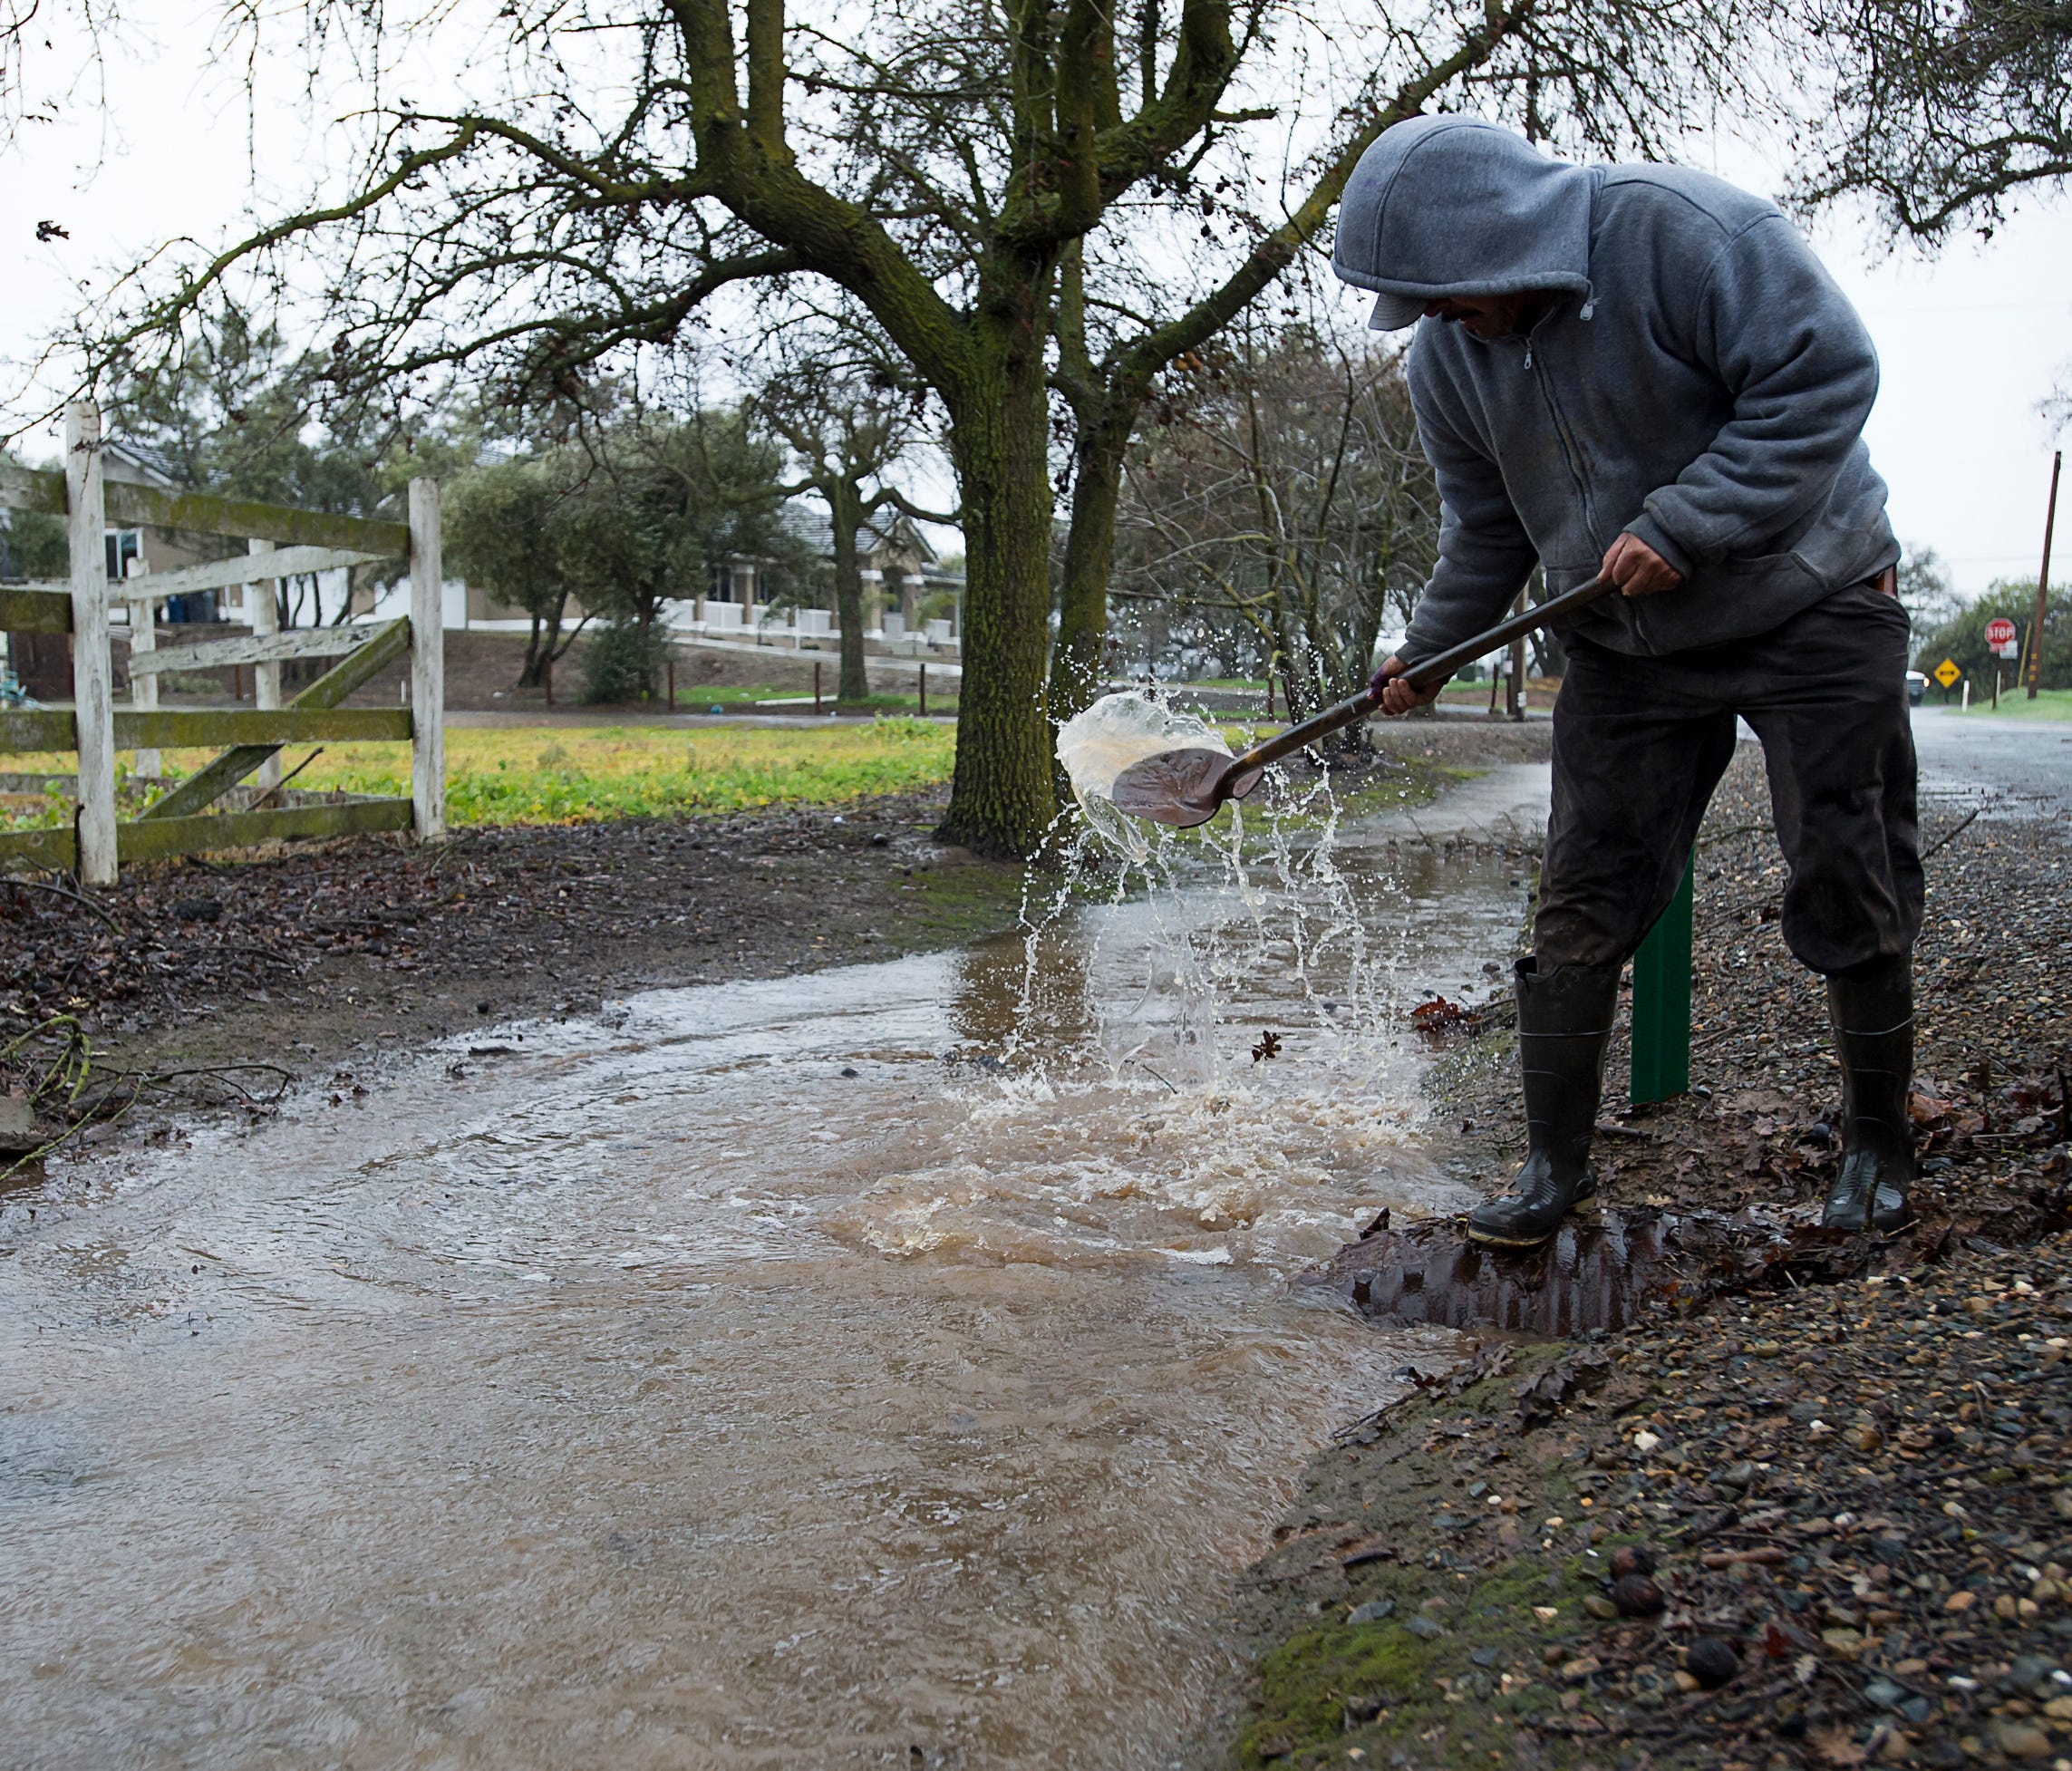 Jose Flores clears storm drains during a storm on Sunday, Jan. 8, 2017, in Wilton, Calif.